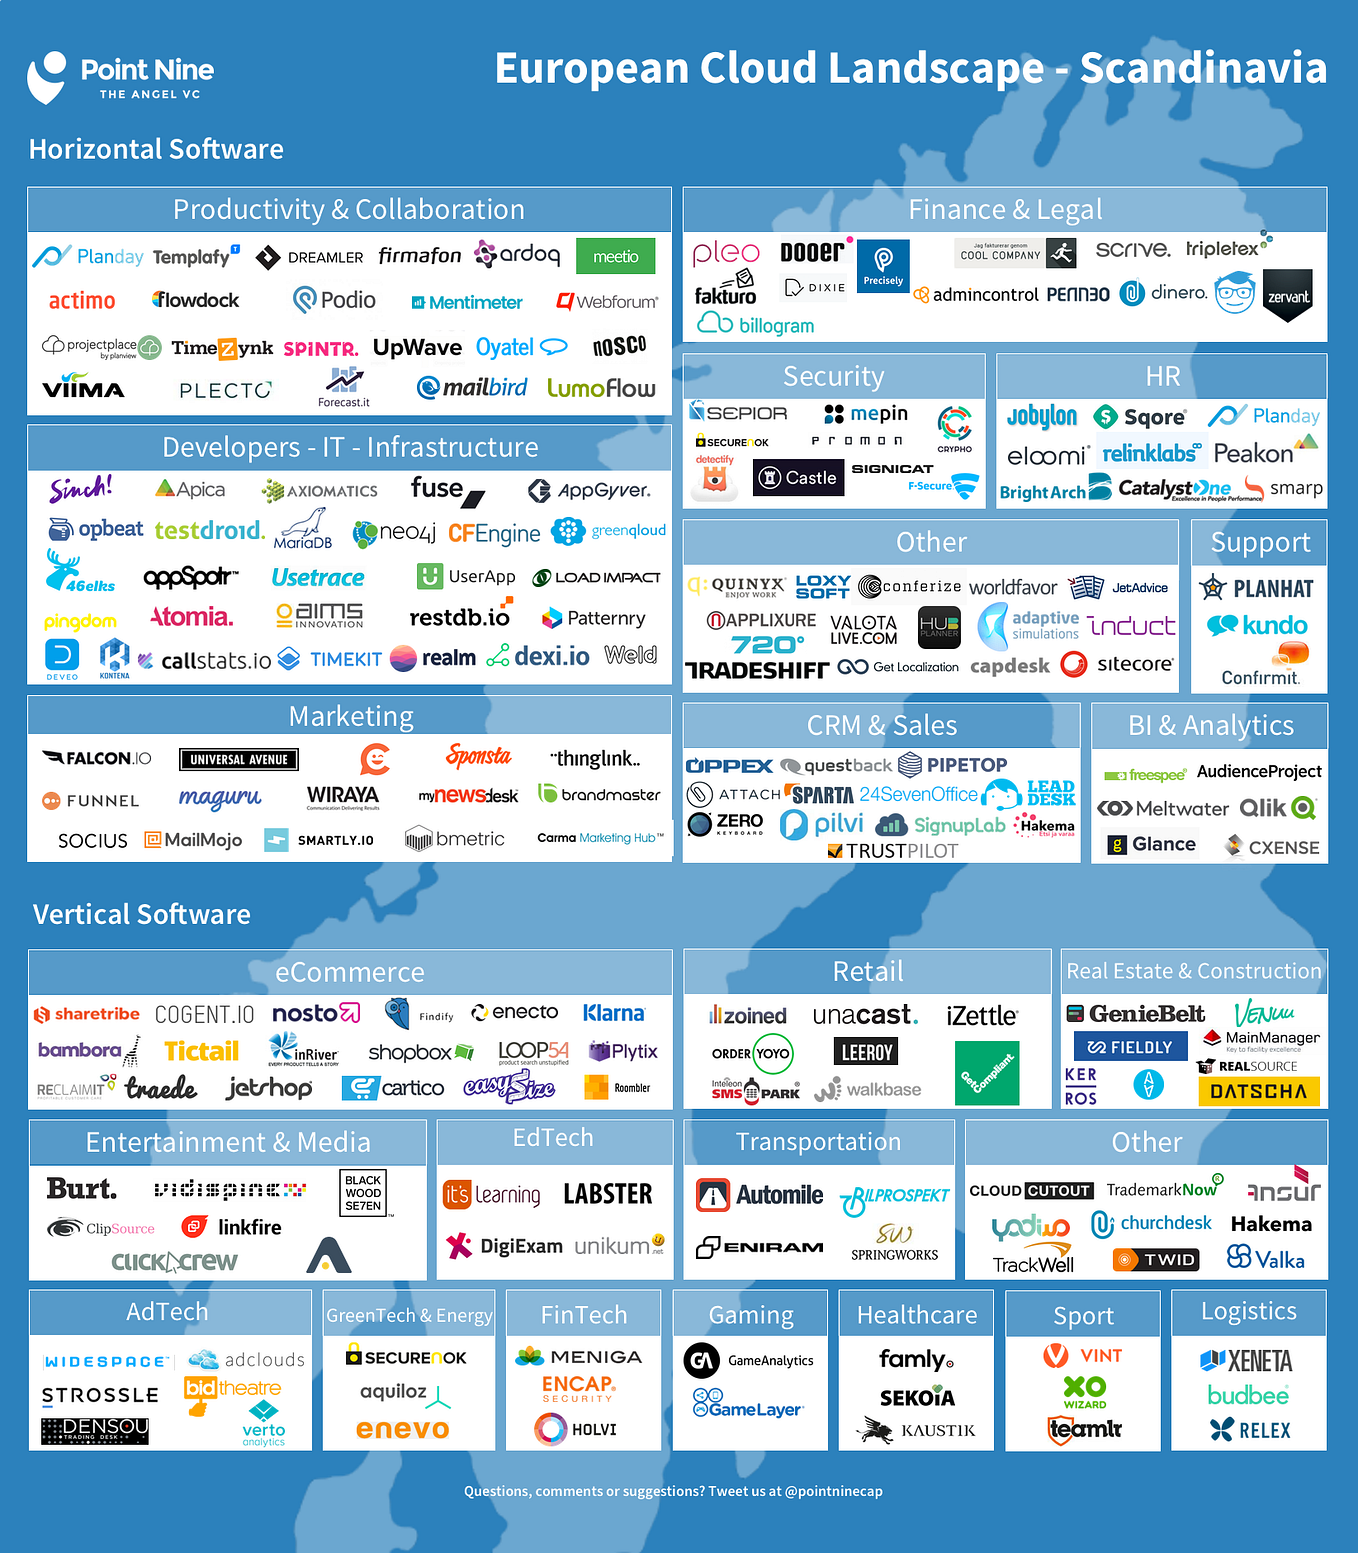 5 insights into the Nordics SaaS and software landscape